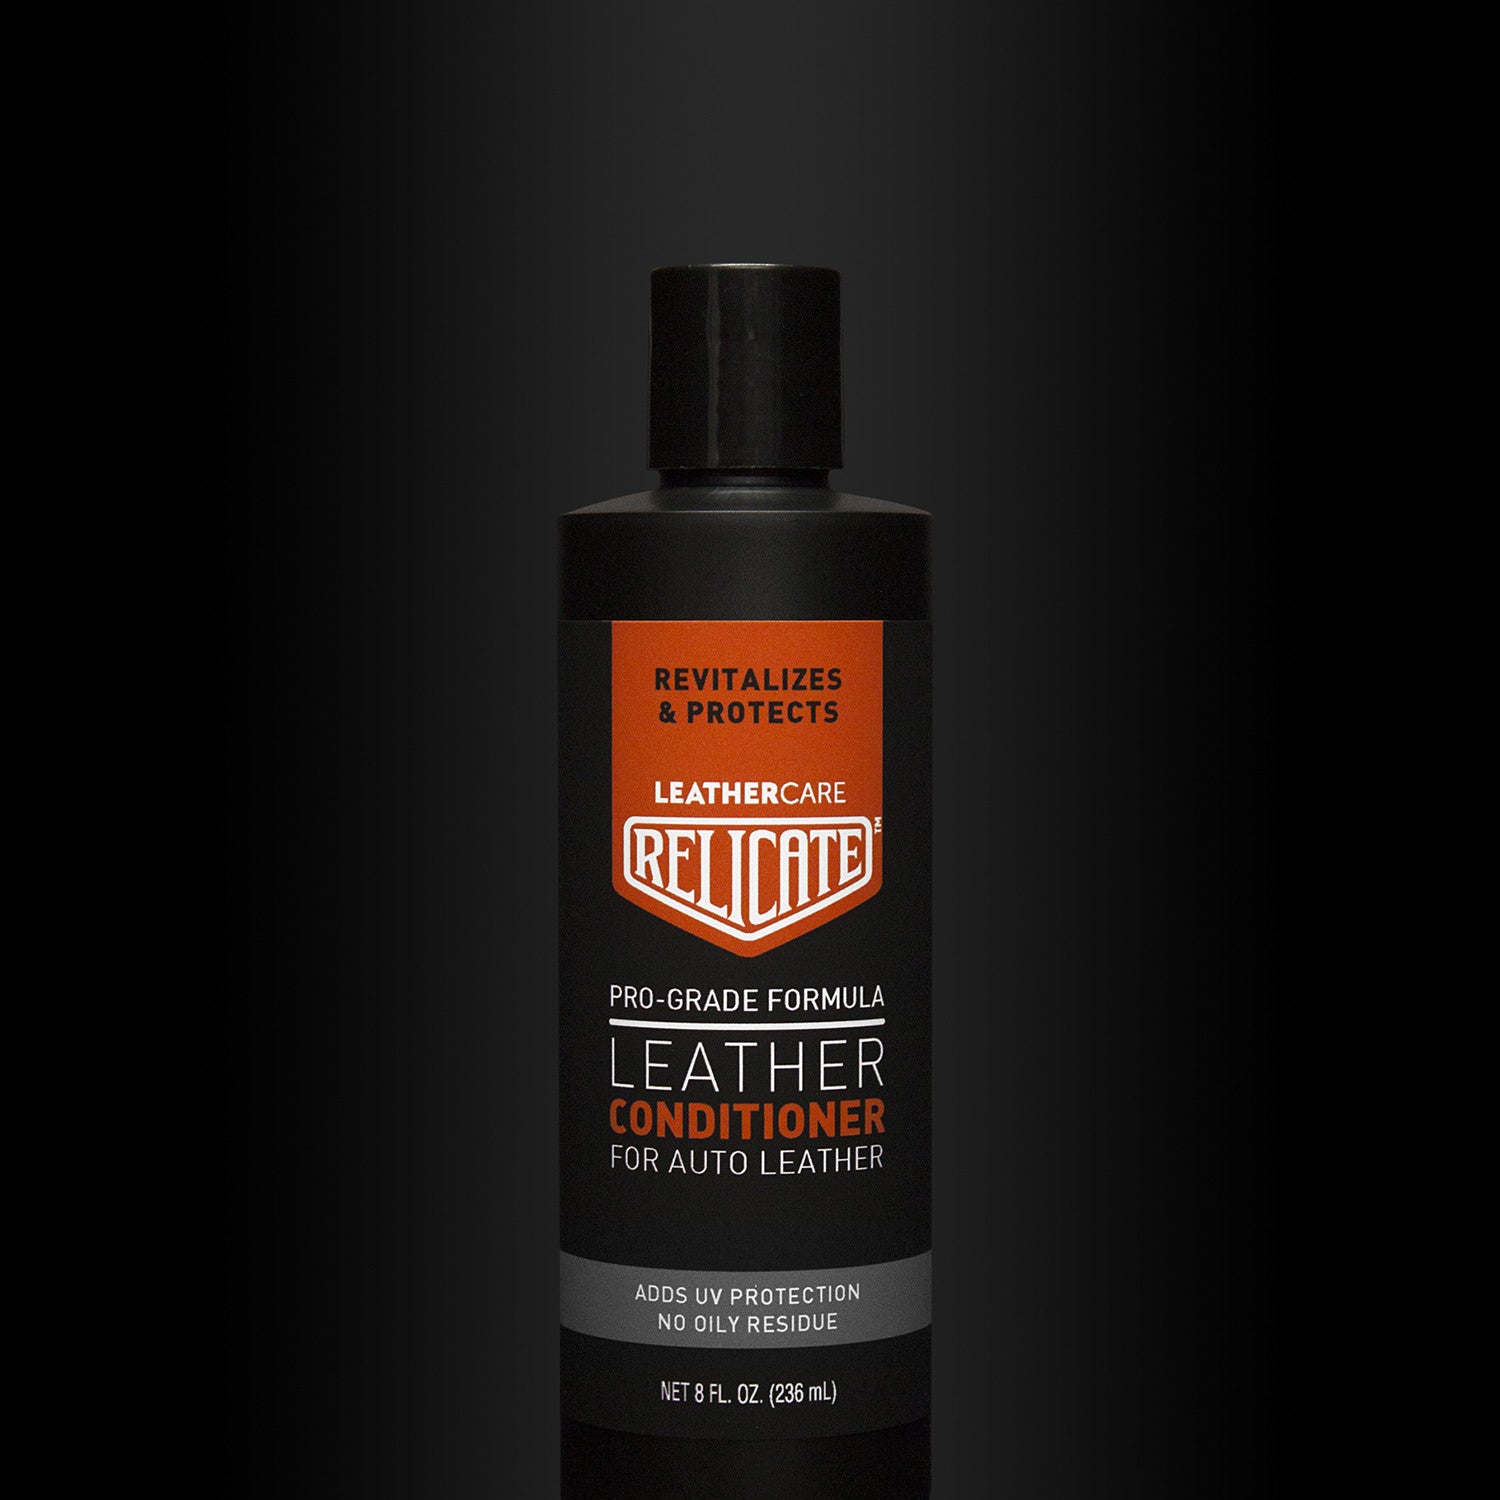 Relicate Leather Conditioner